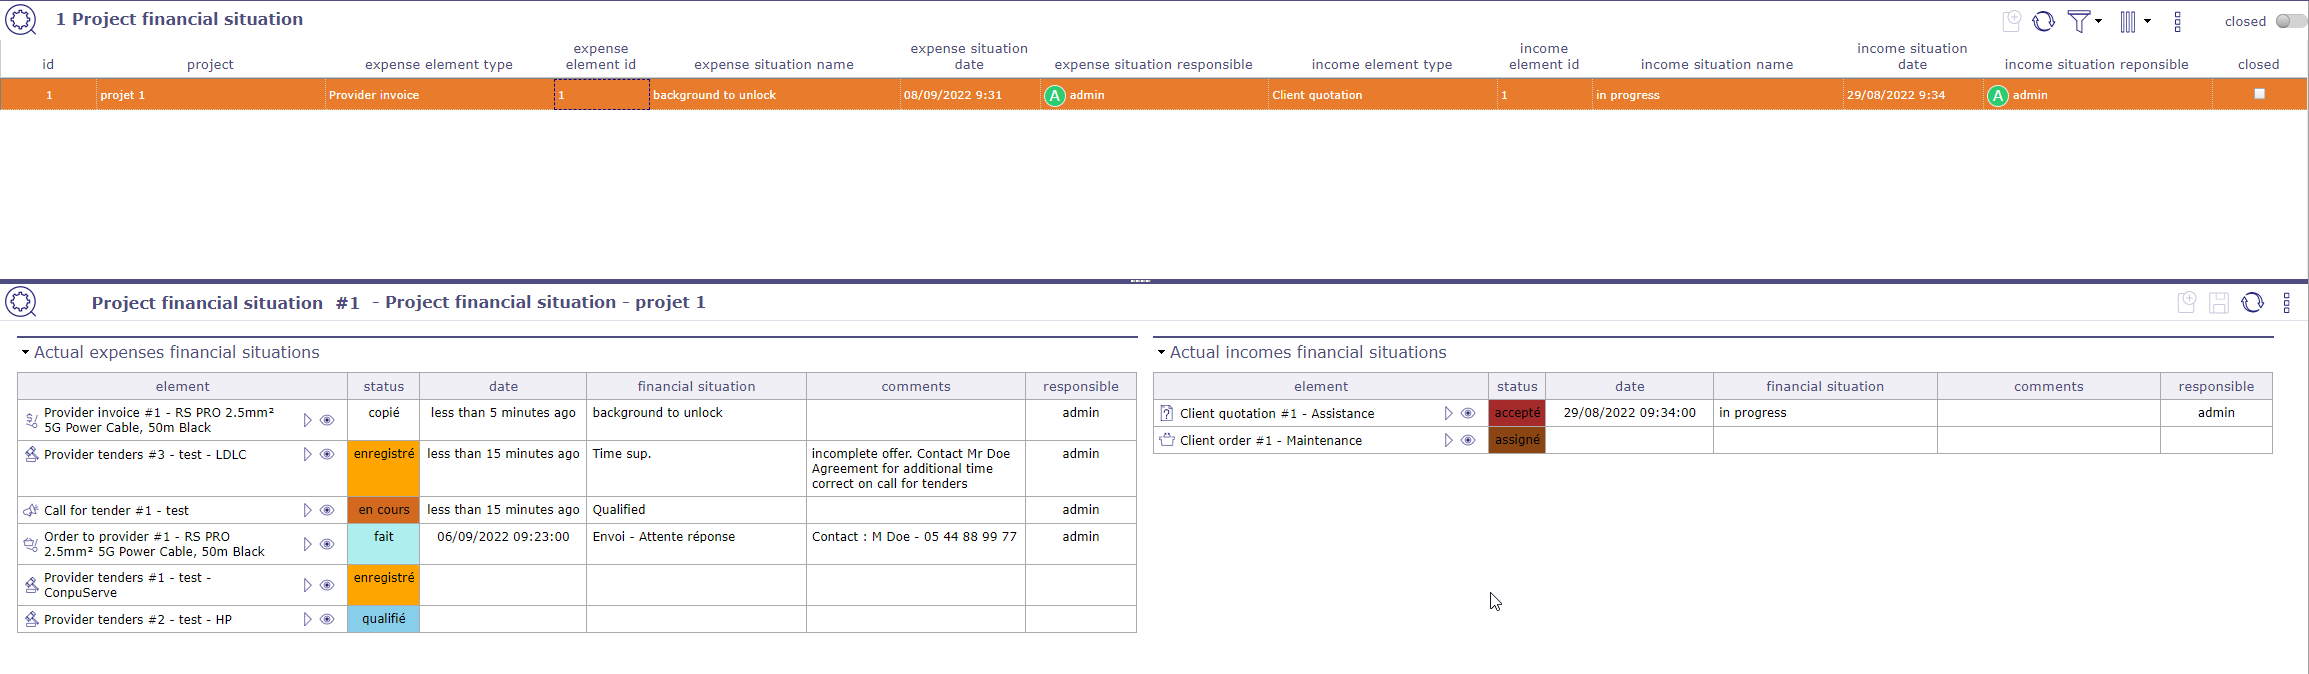 Project financial situation screen